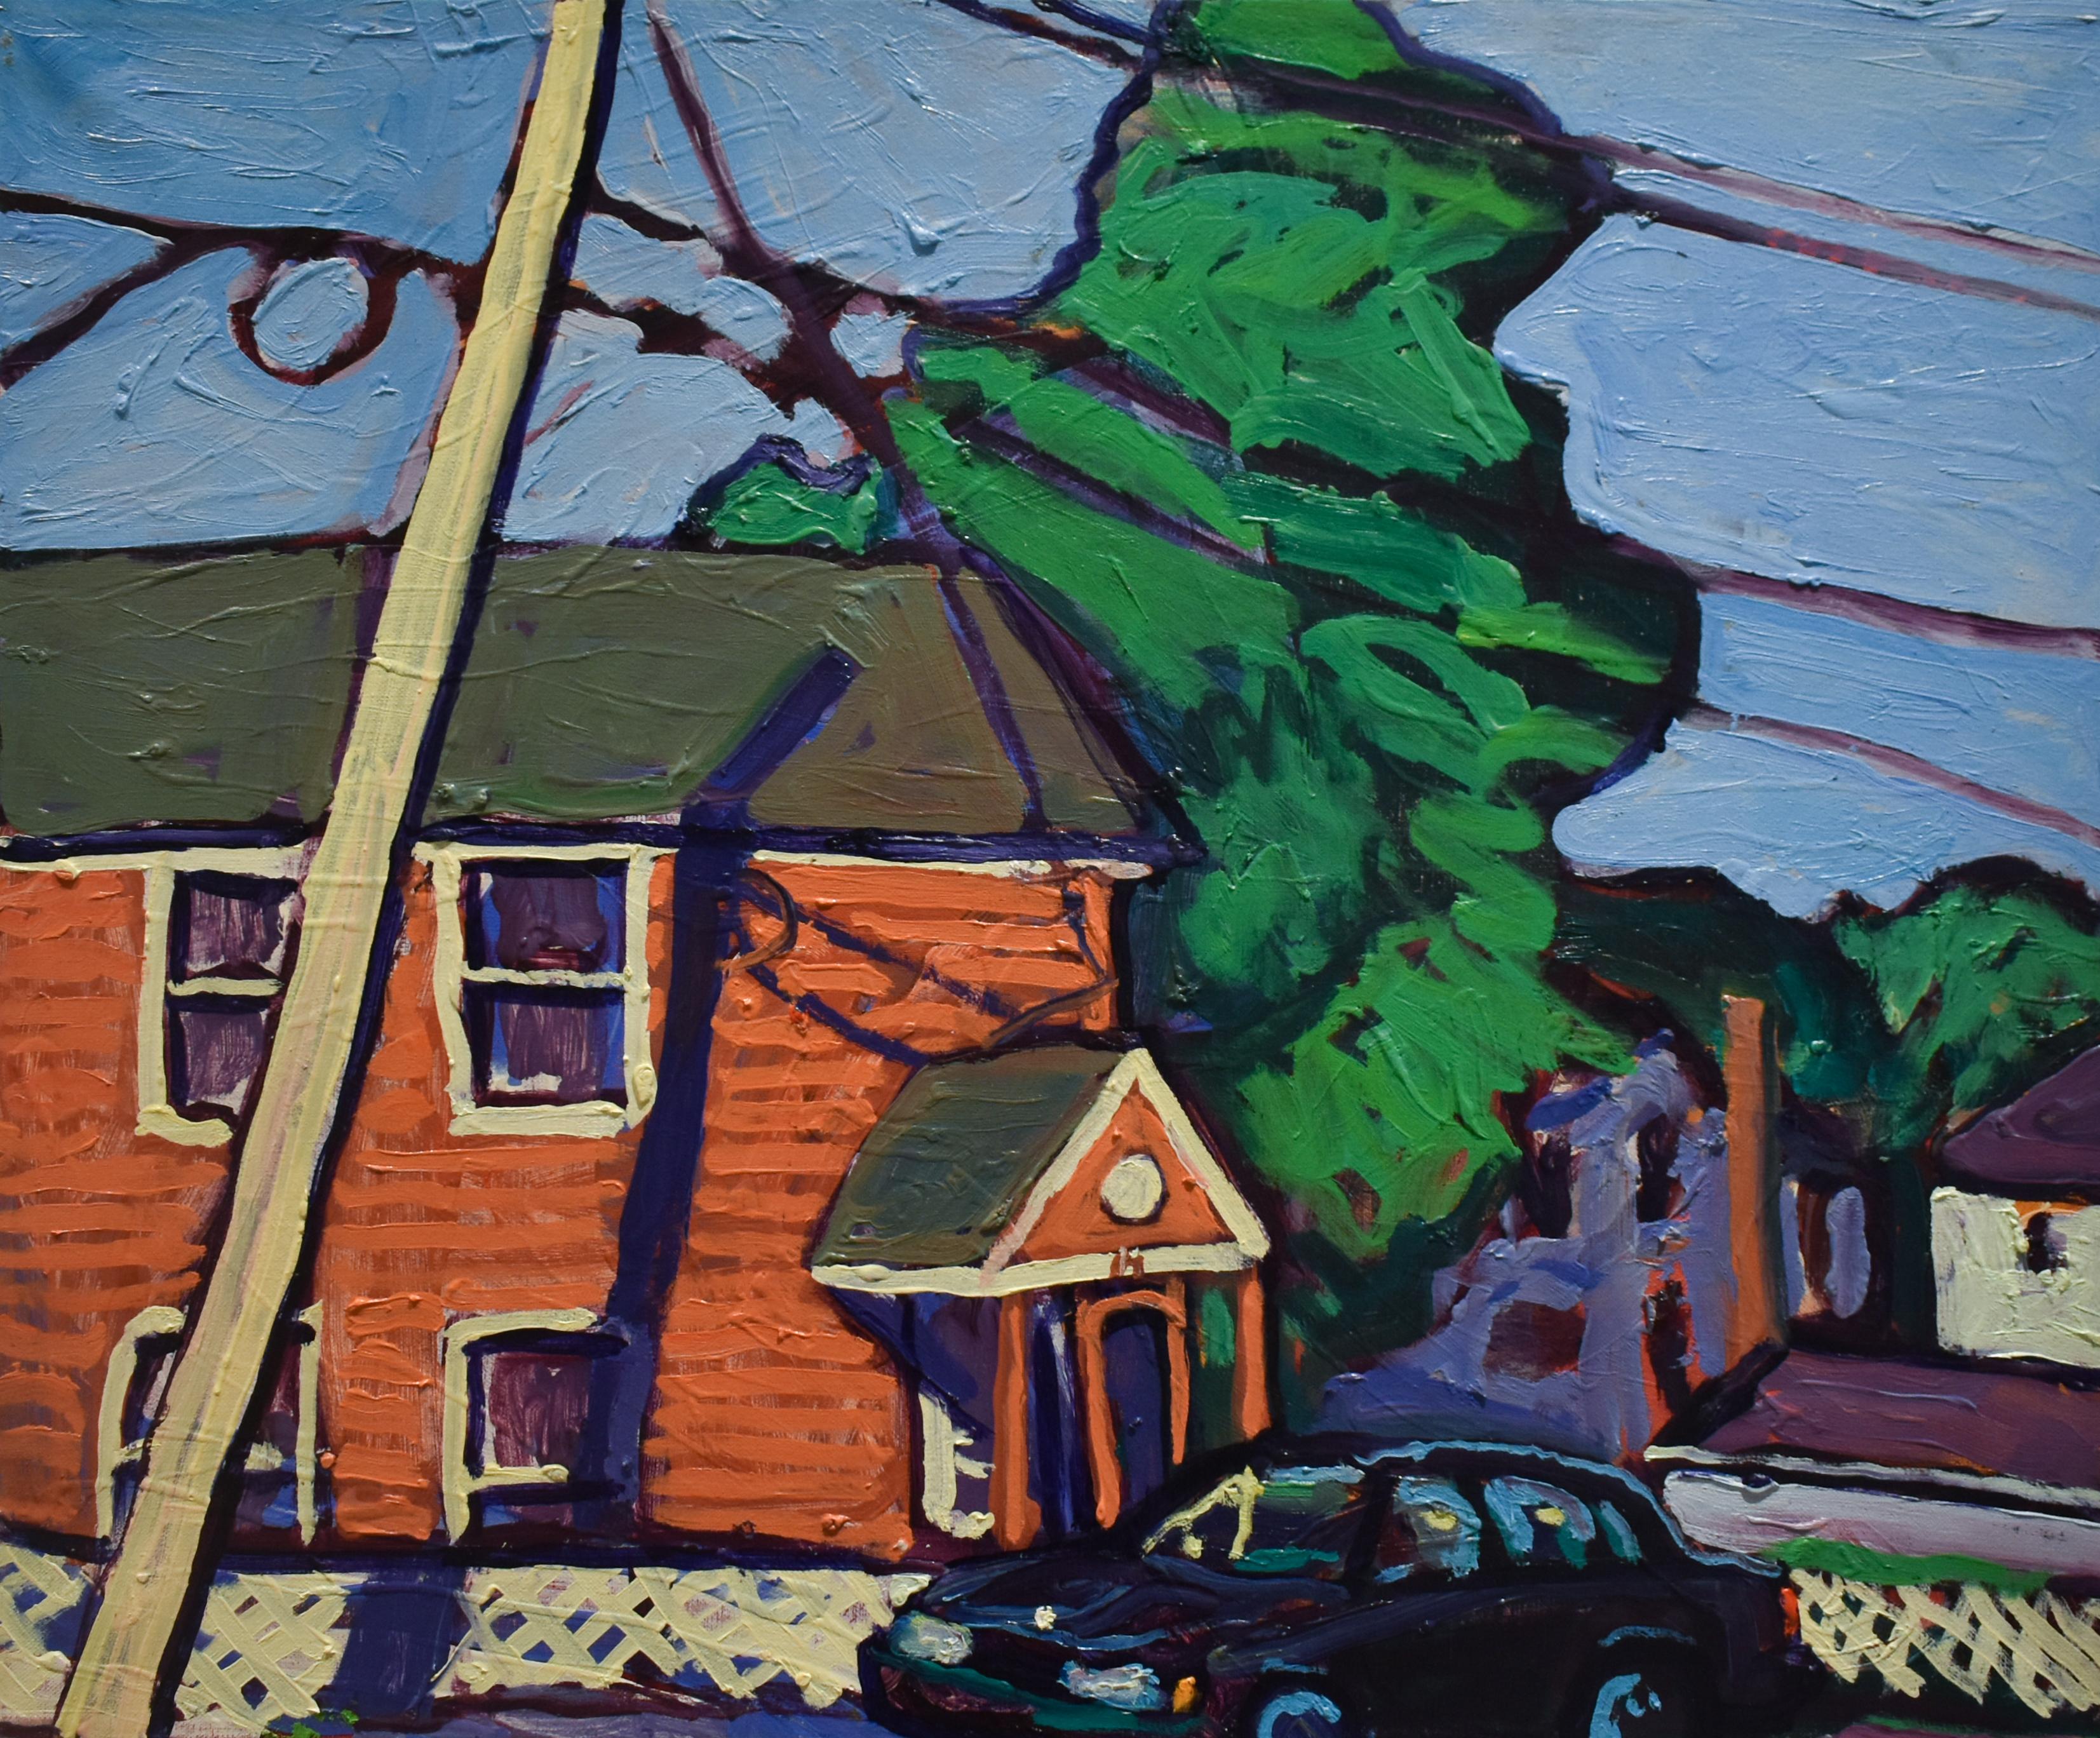 14 3rd St. Athens NY (Oil on Linen Town Street Landscape in Vivid Color Palette) - Painting by Dan Rupe